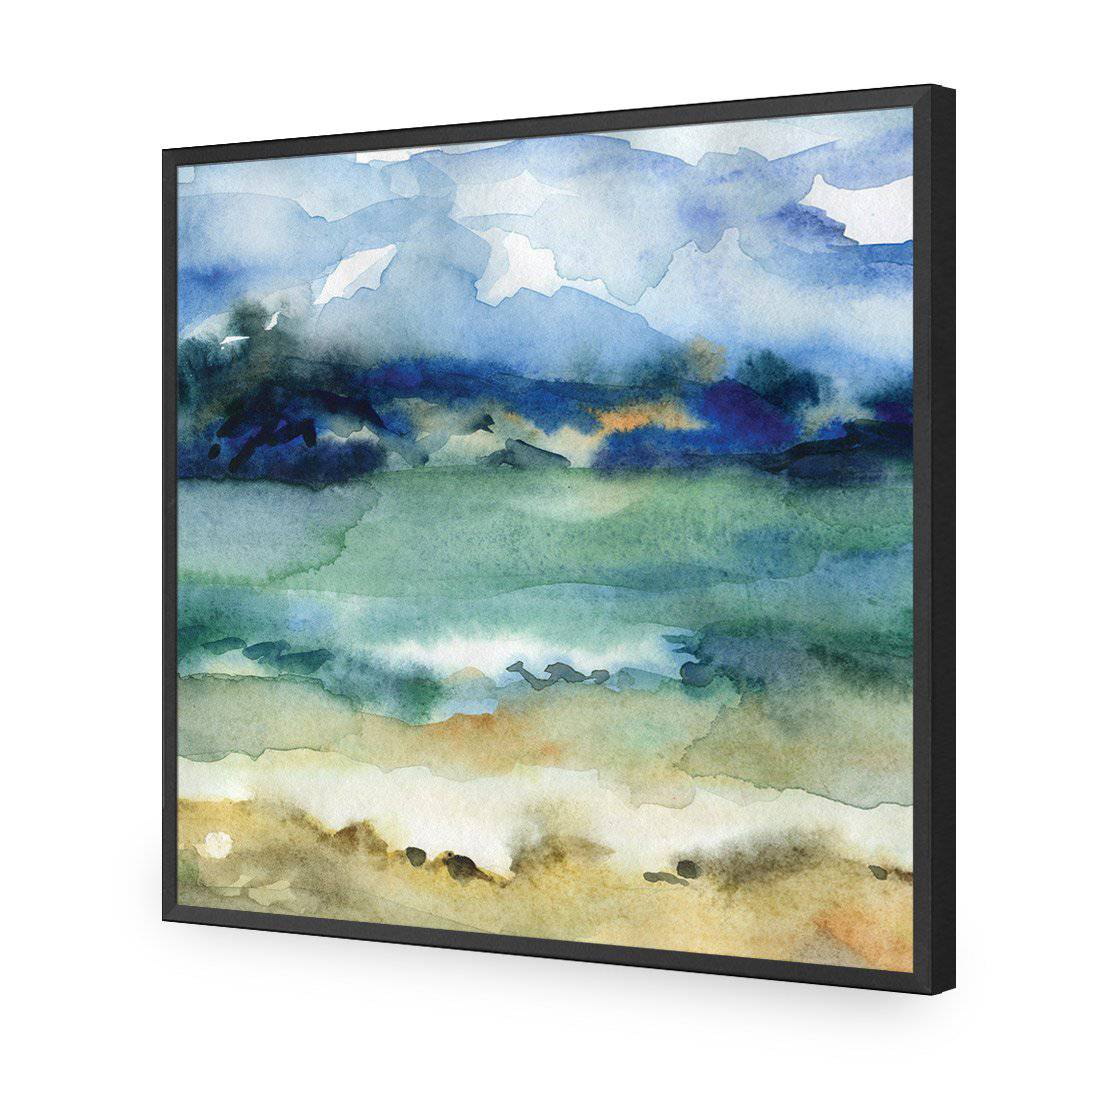 Timeless, Square-Acrylic-Wall Art Design-Without Border-Acrylic - Black Frame-37x37cm-Wall Art Designs